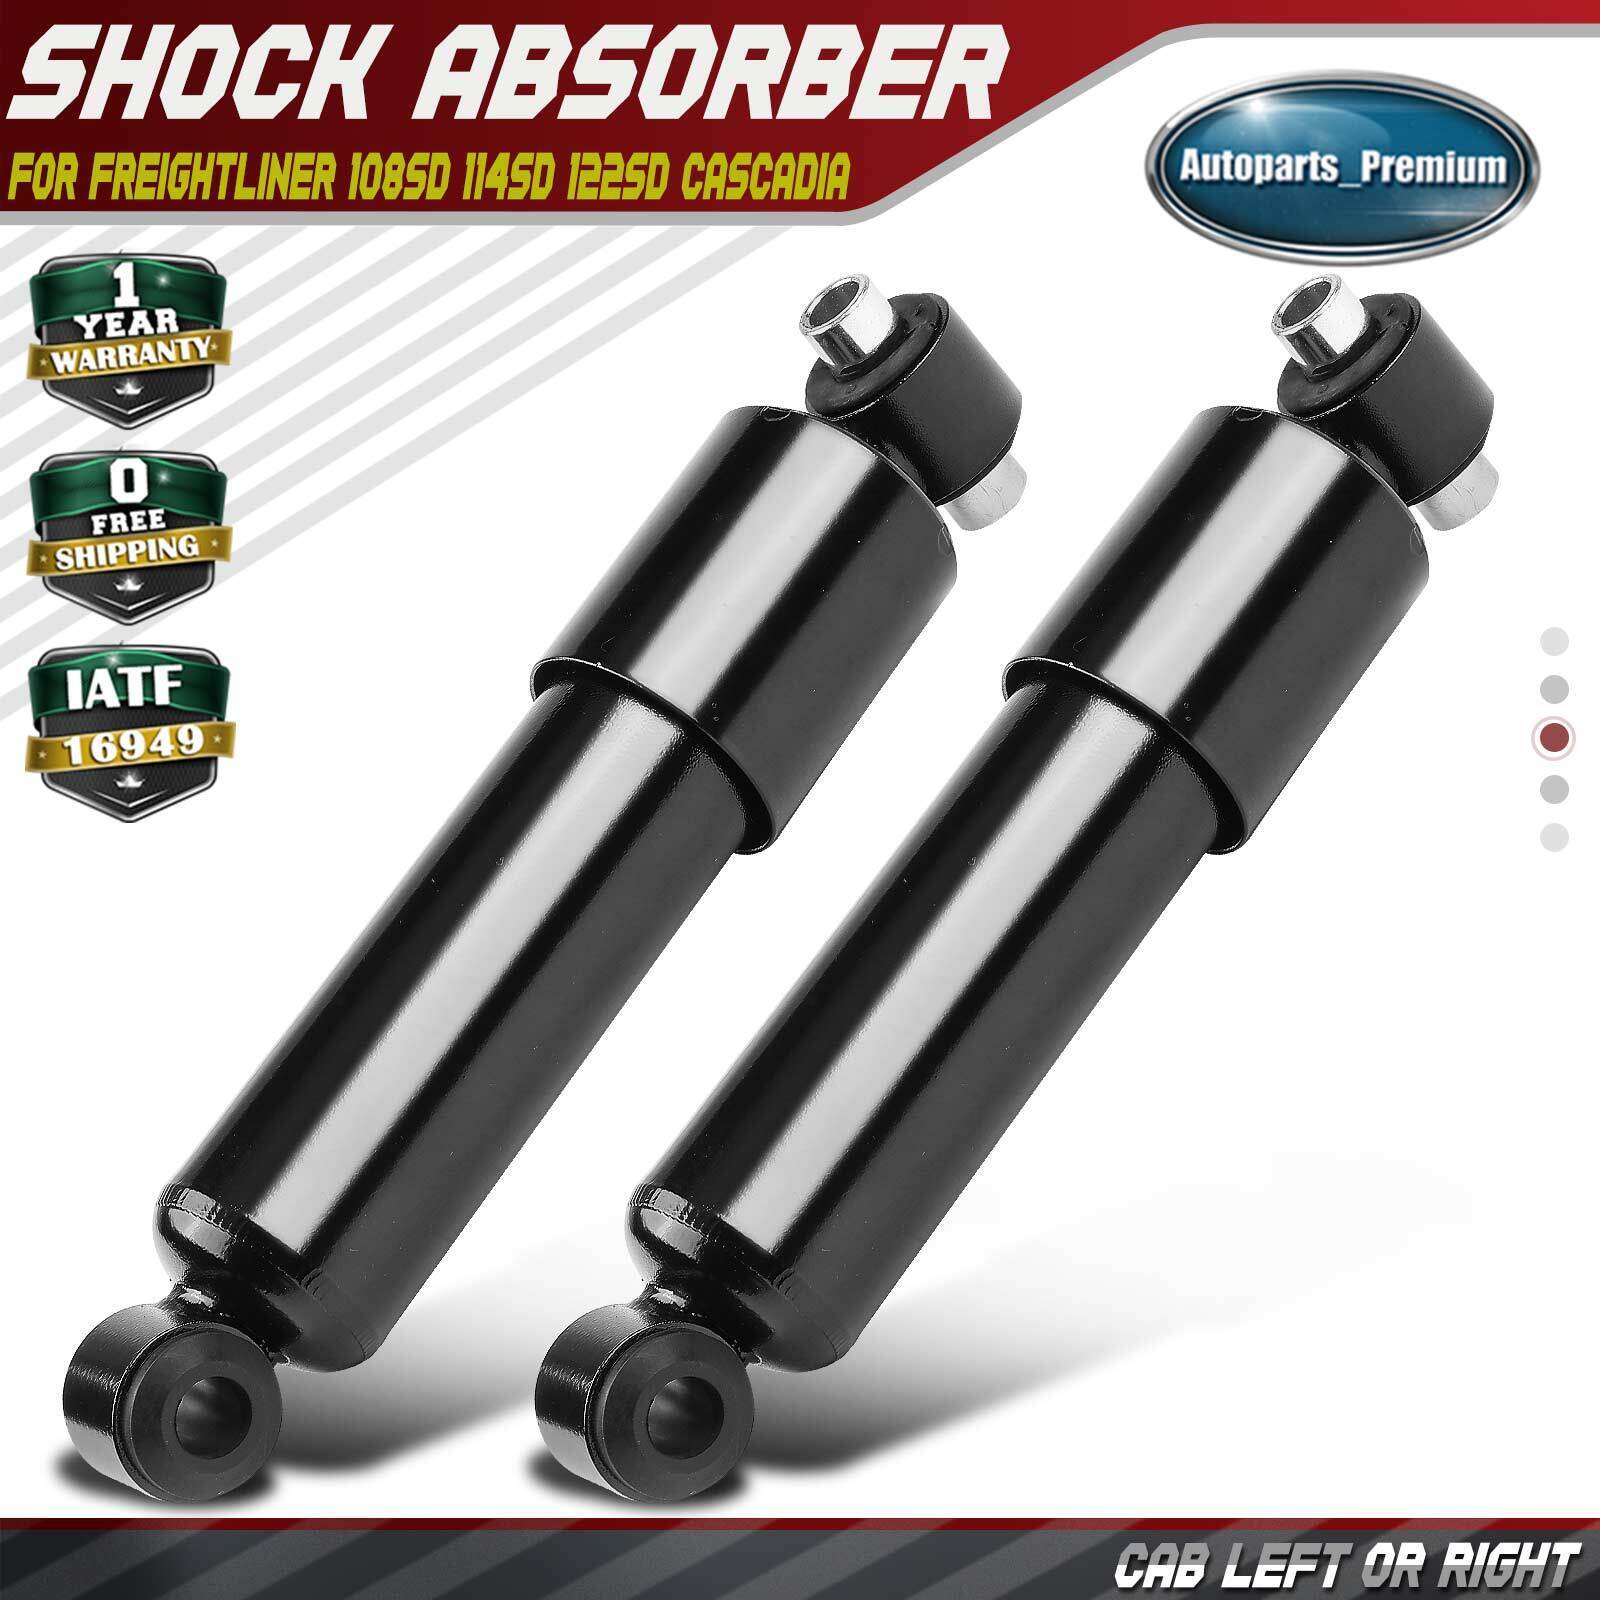 2x Cab Left and Right Shock Absorber for Freightliner 108SD 114SD 122SD Cascadia